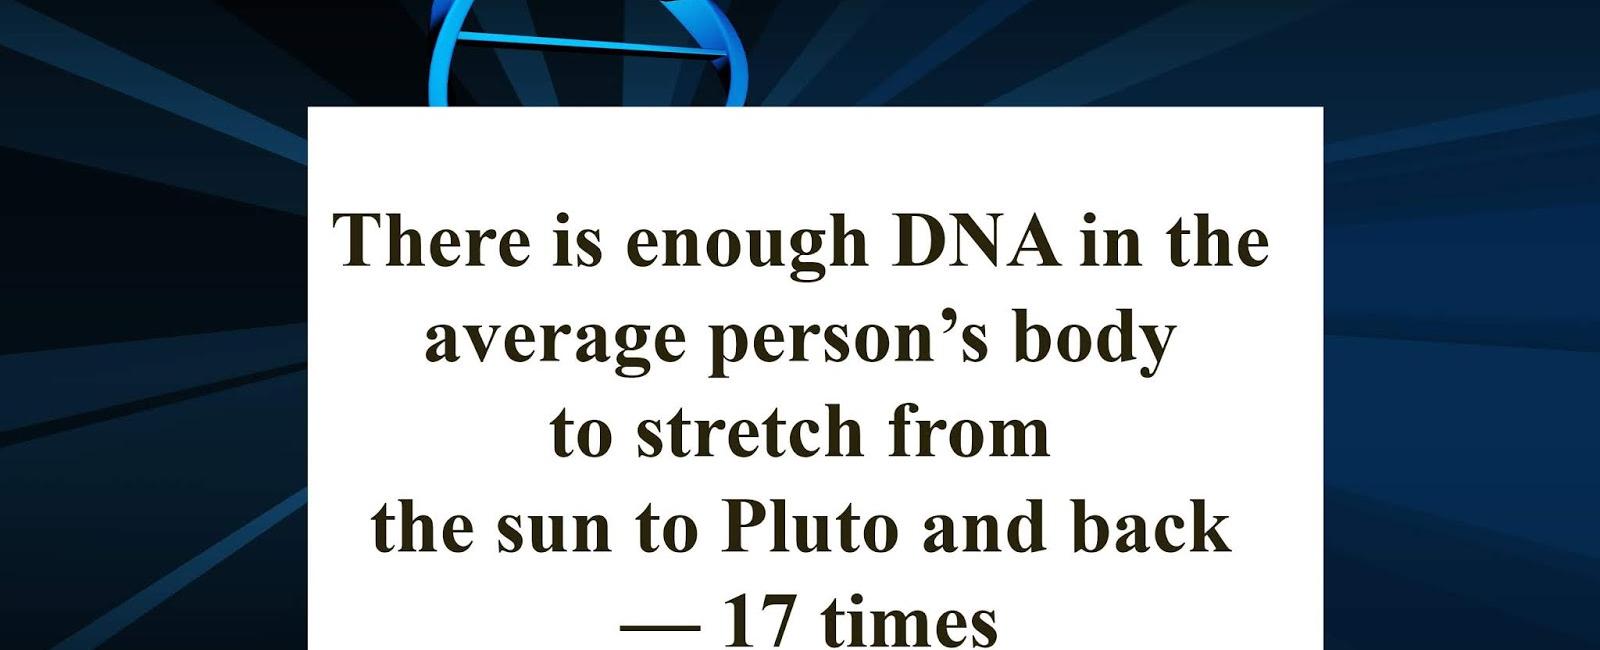 There is enough dna in the average person s body to stretch from the sun to pluto and back 17 times